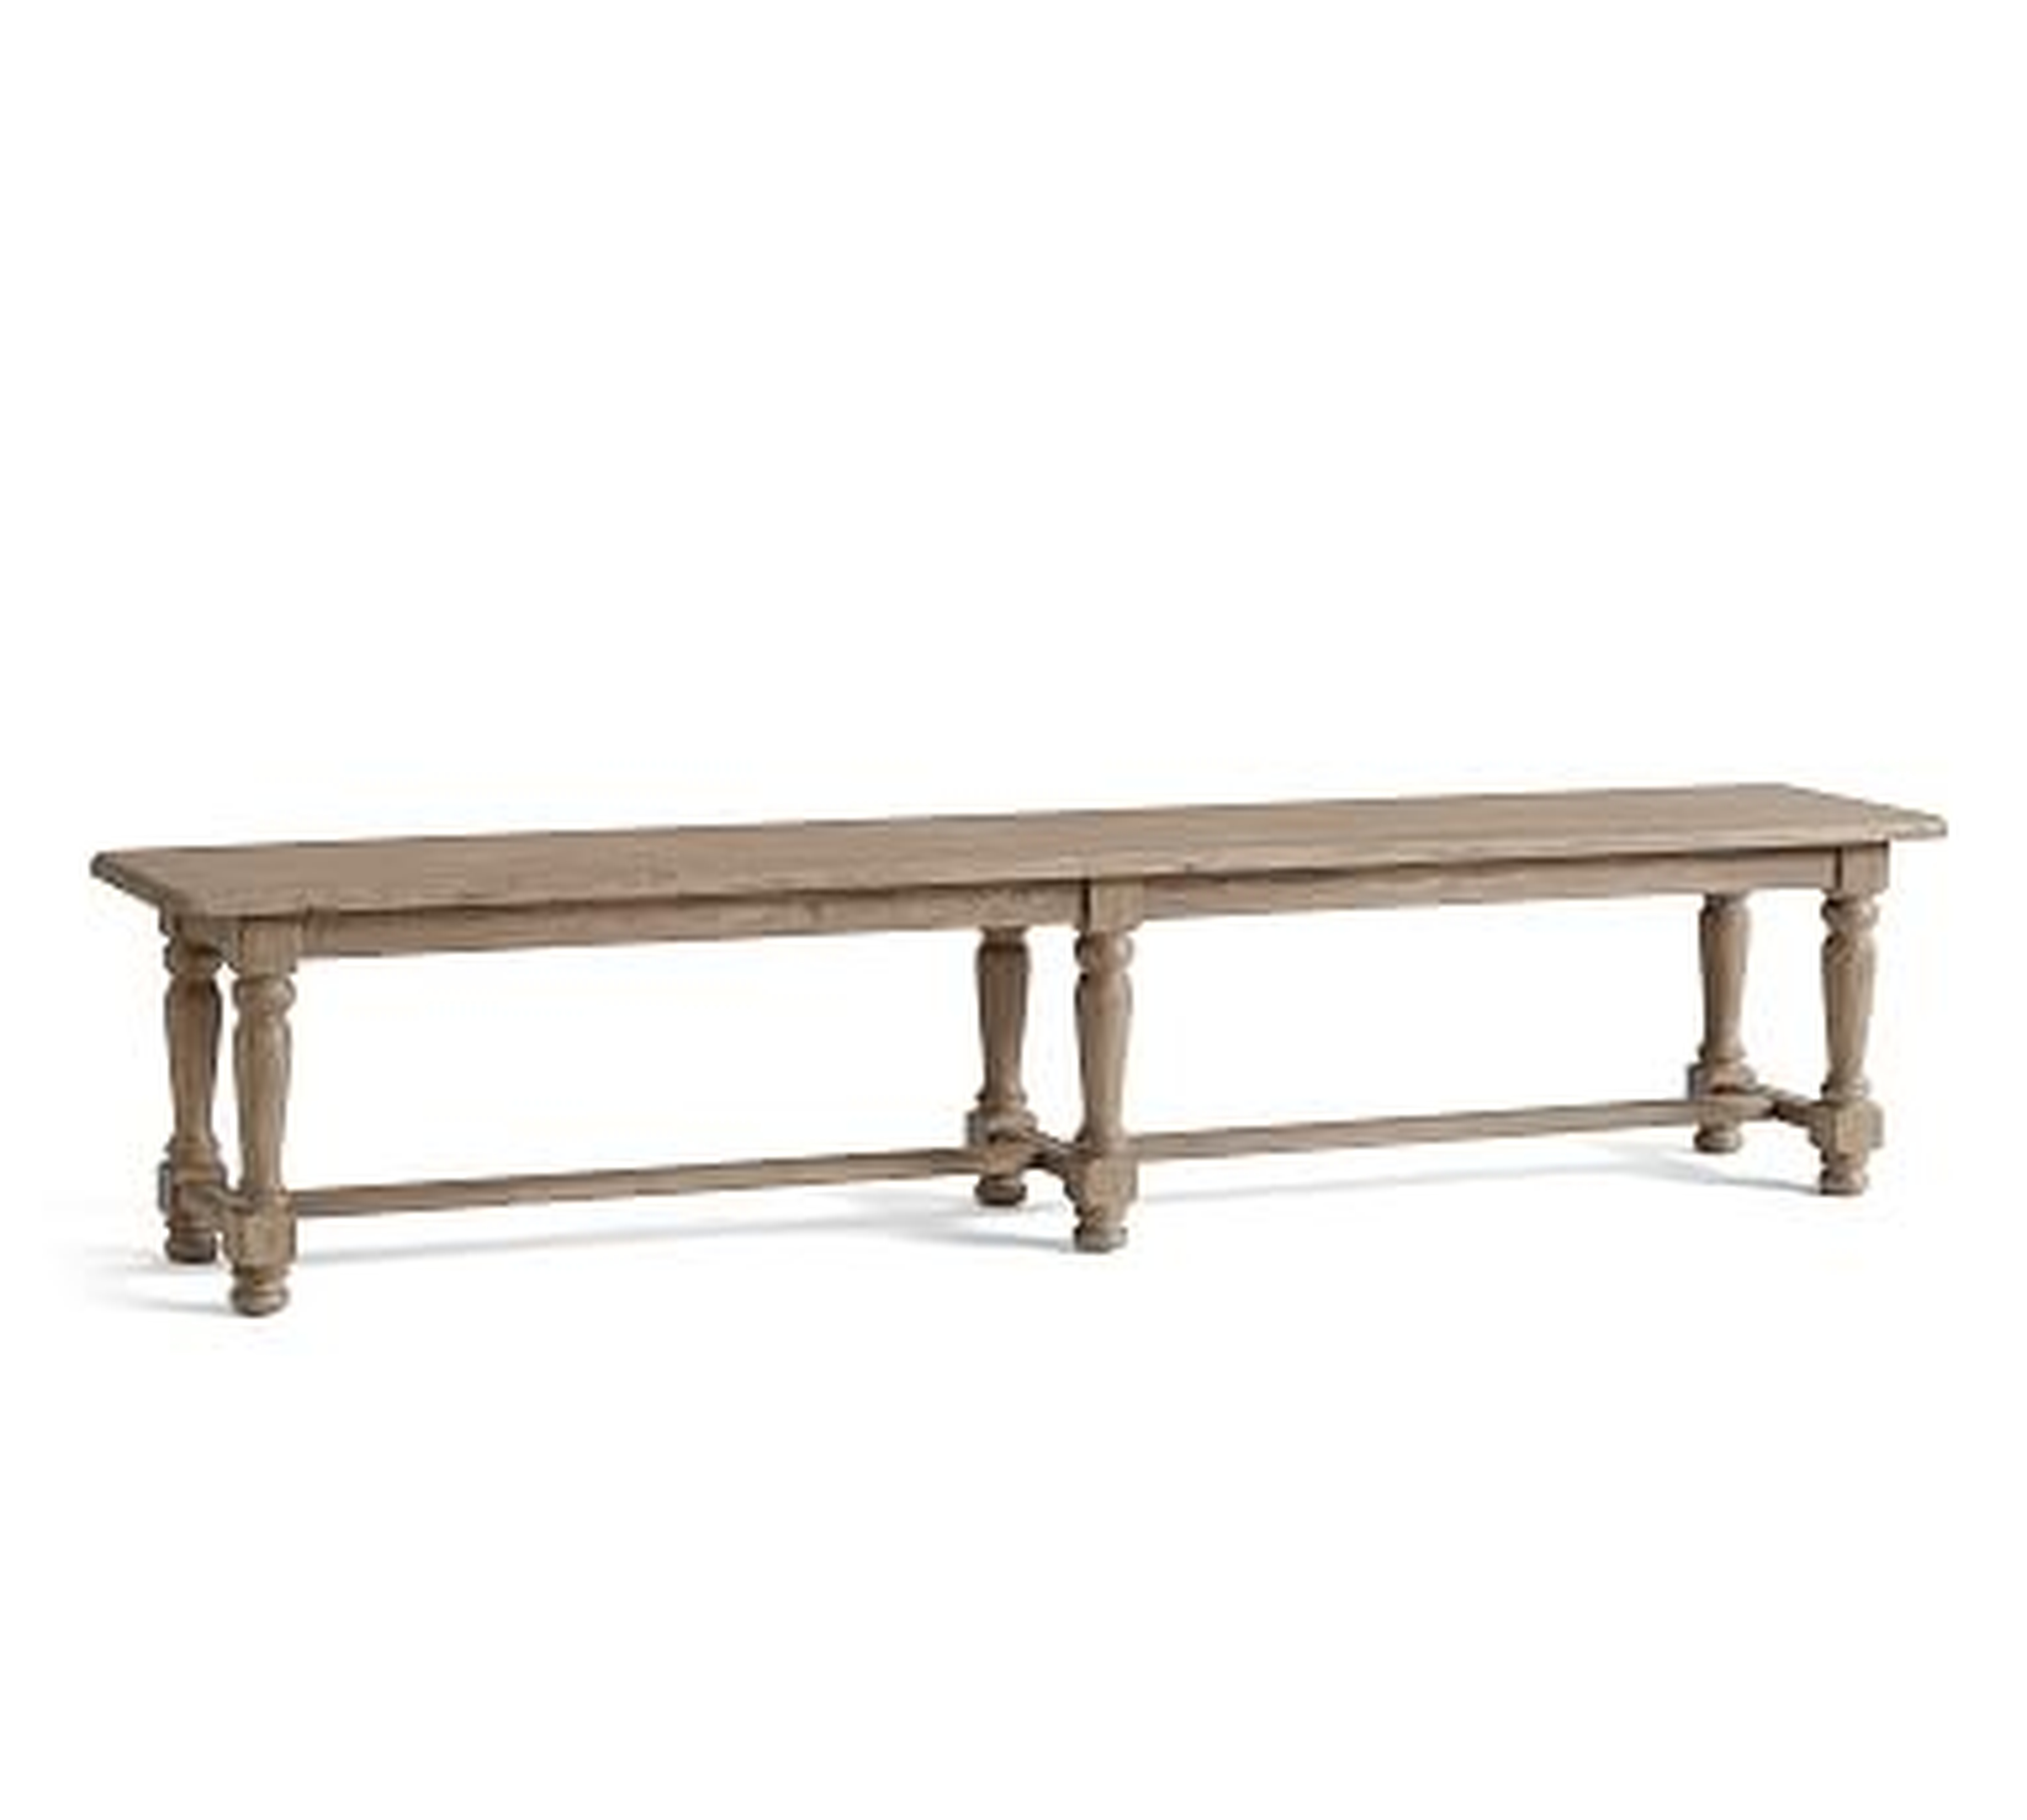 Normandy Dining Bench, Versaille Gray, 86"L x 18"W - Pottery Barn